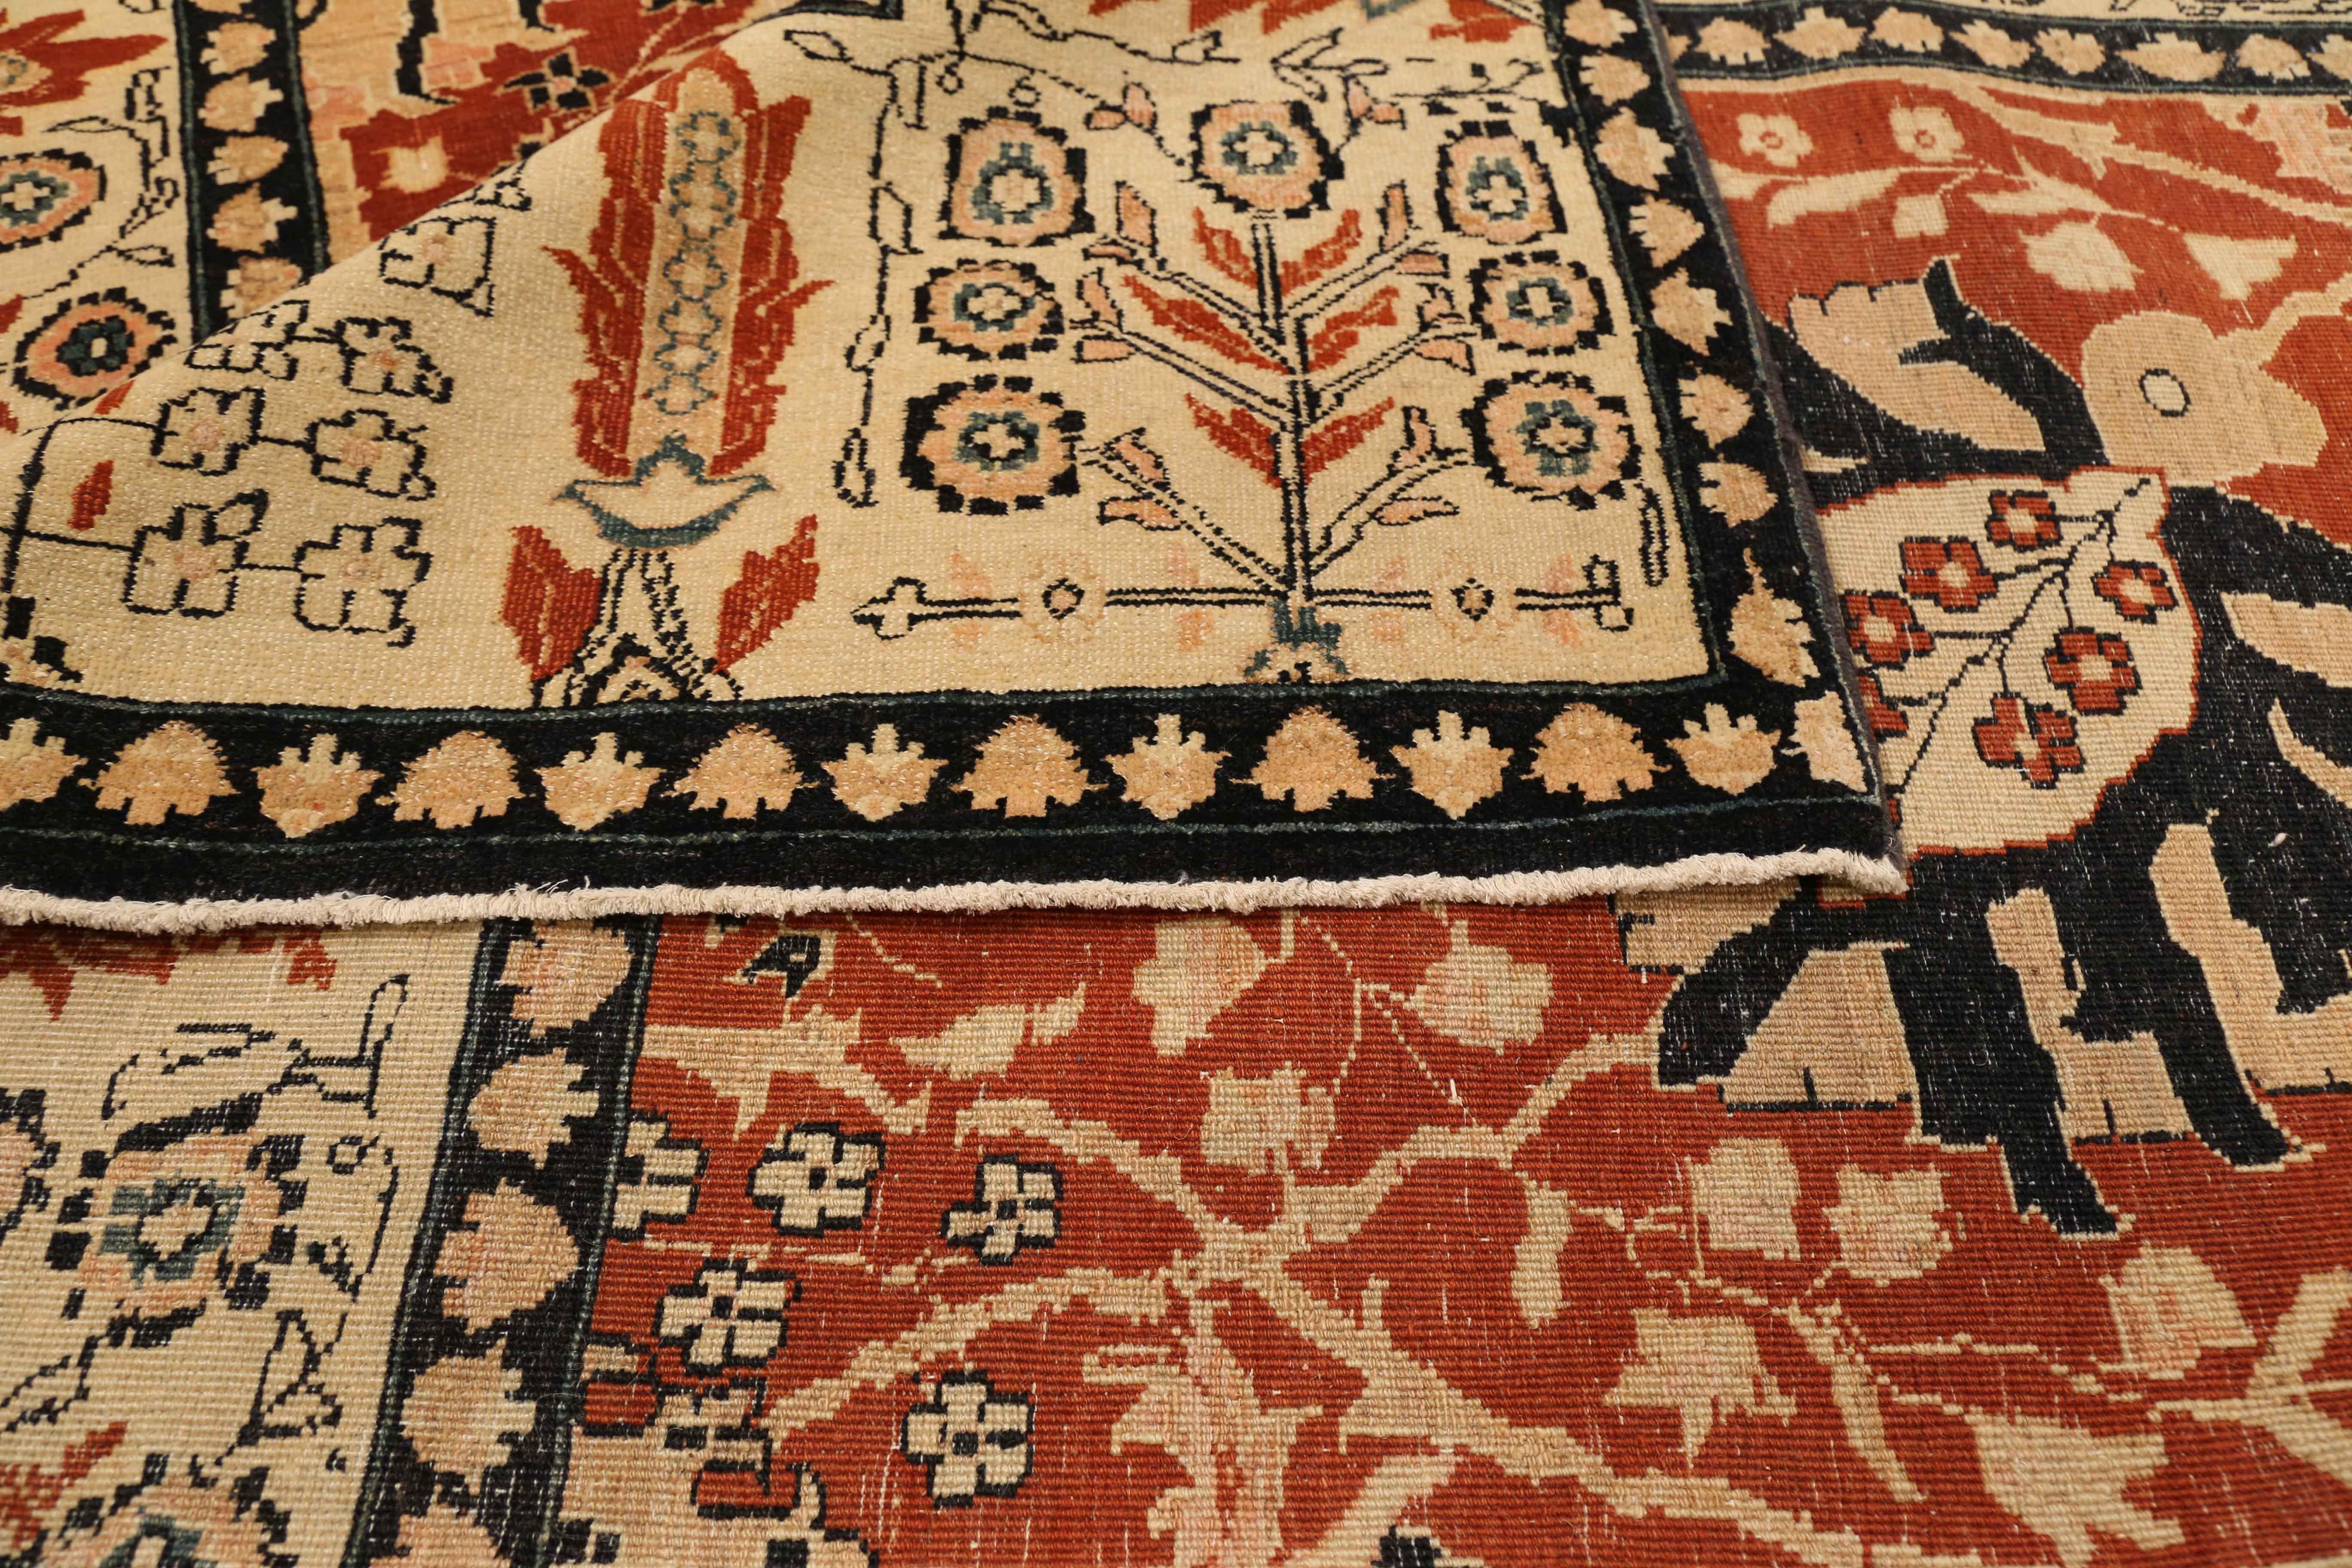 Turkish rug made from the best quality of wool and vegetable dyes. It features a spectacular floral center field in red and ivory surrounded by a ‘grain field’ border reminiscent of a bountiful harvest. This motif is commonly associated with Tabriz